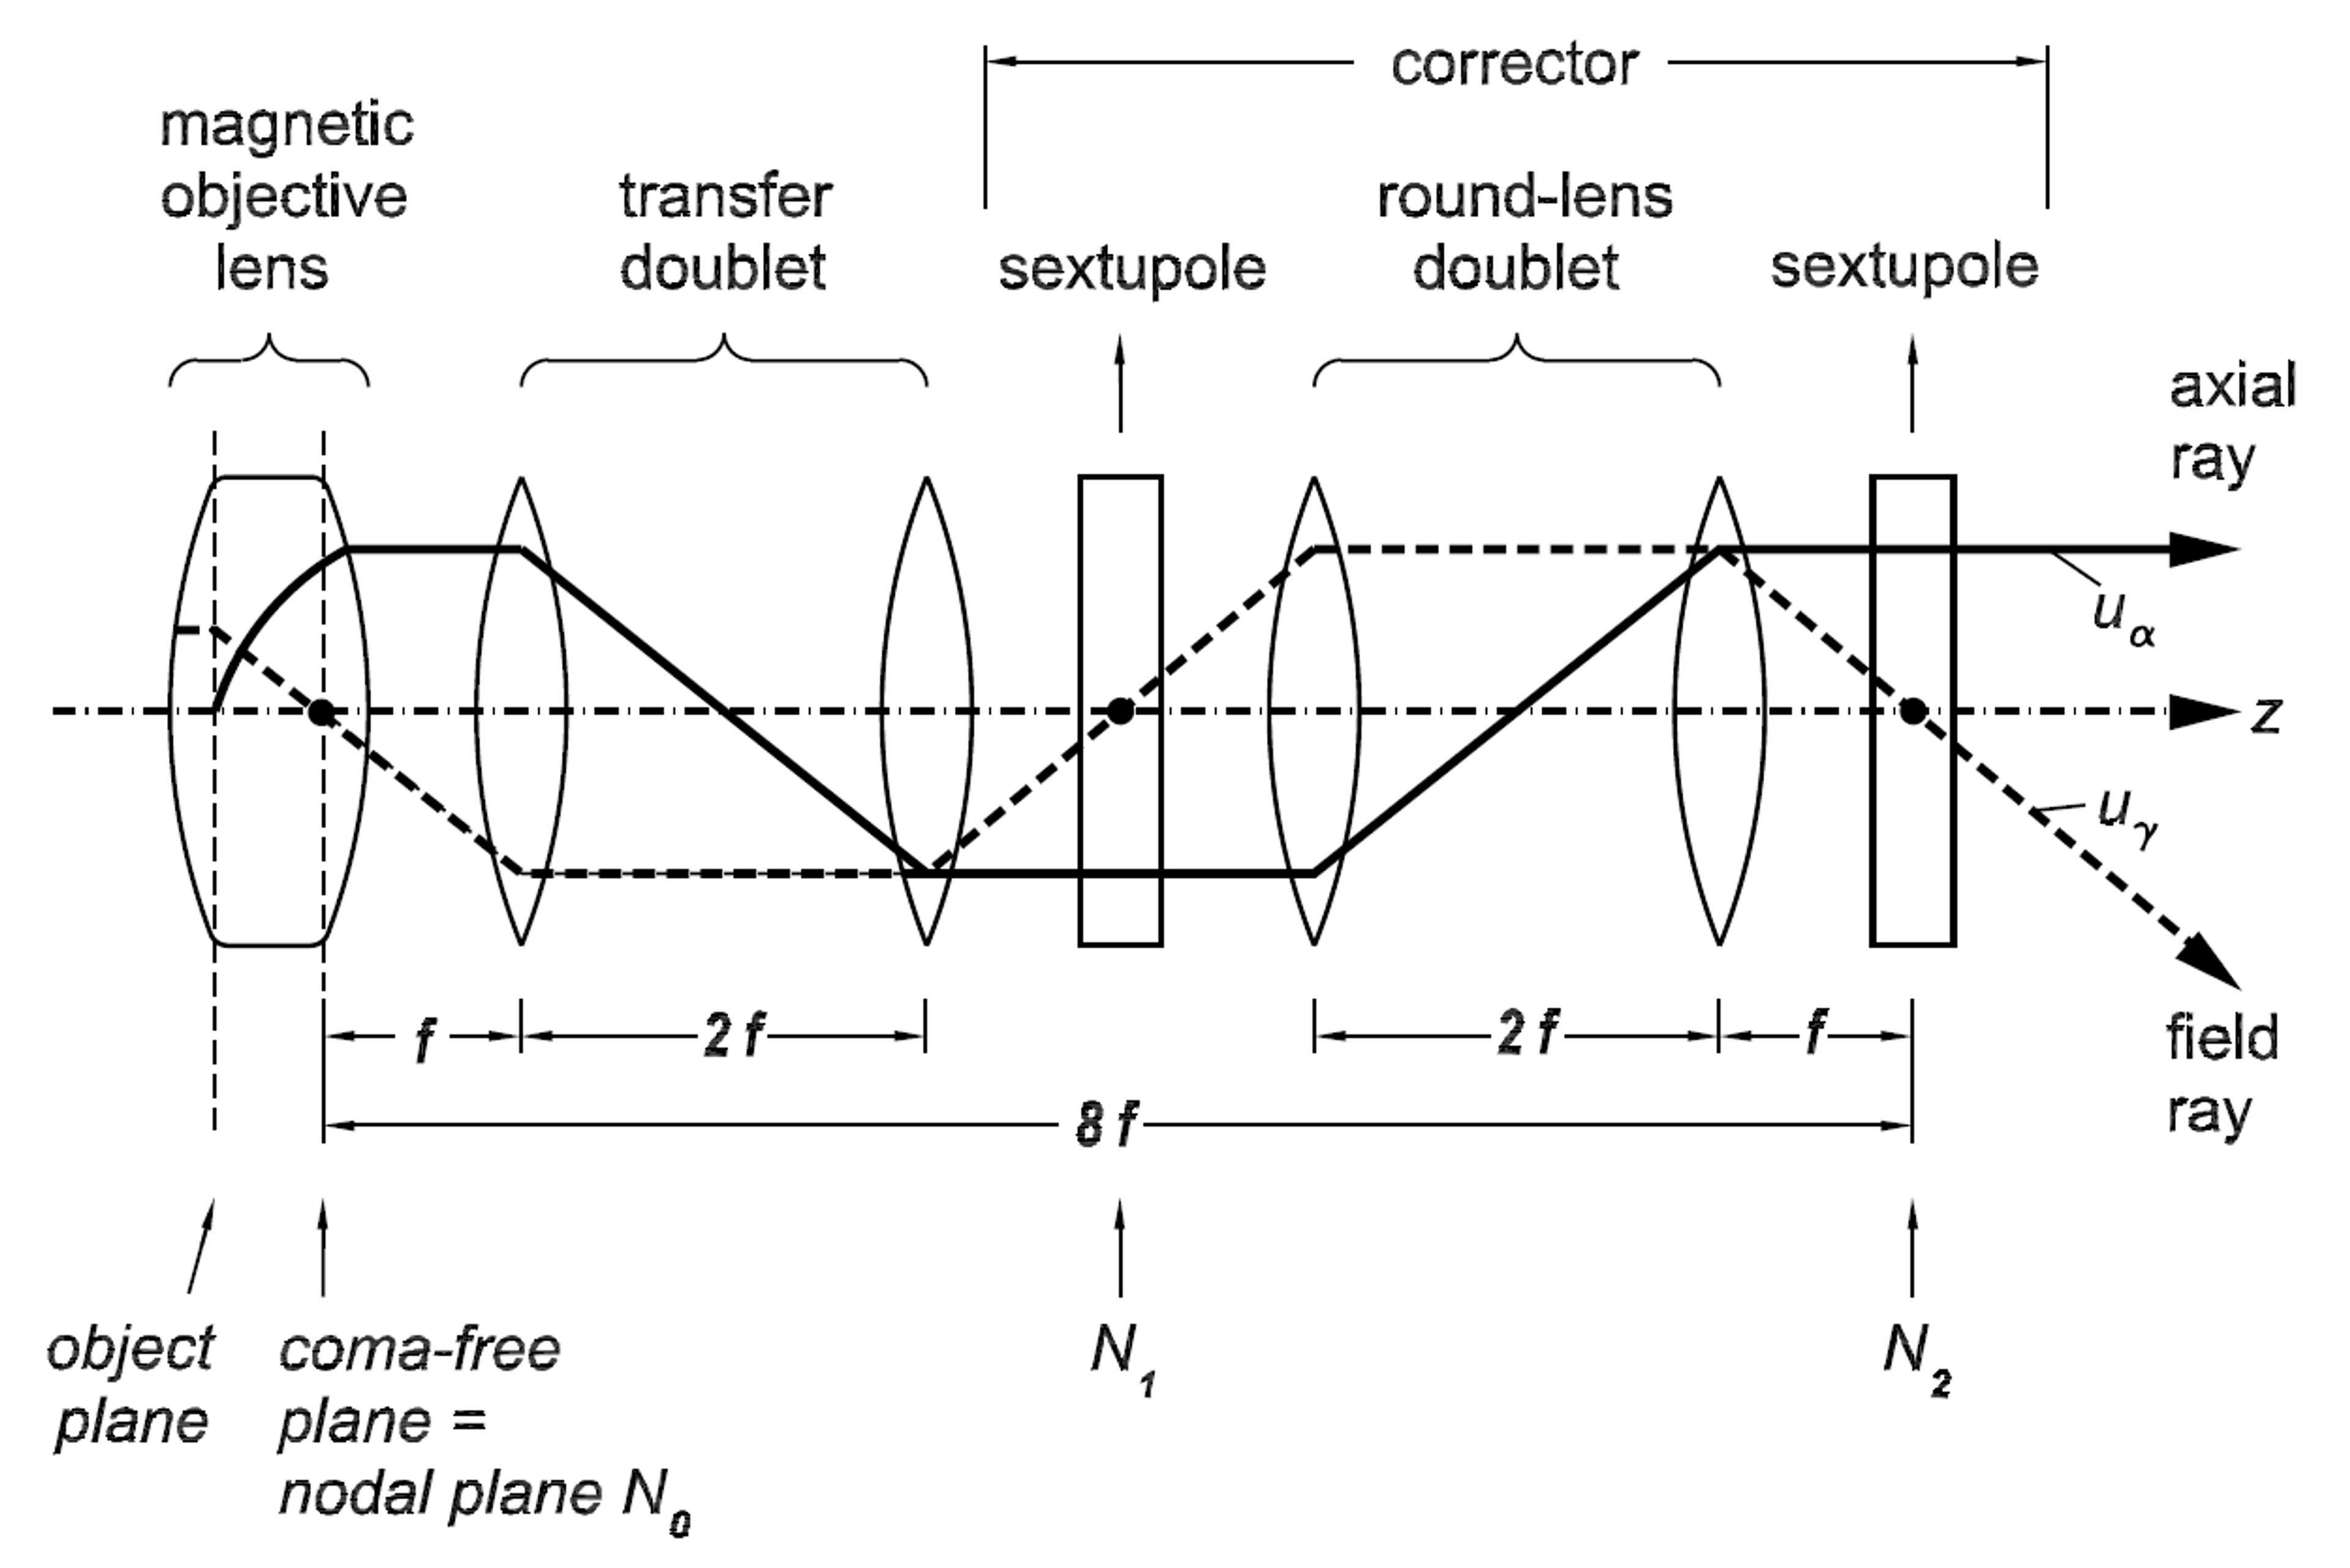 Figure 1. The schematic for an aberration corrector in the 1990 paper by Harald Rose. Optik 85, 19–24 (1990); © Elsevier GmbH